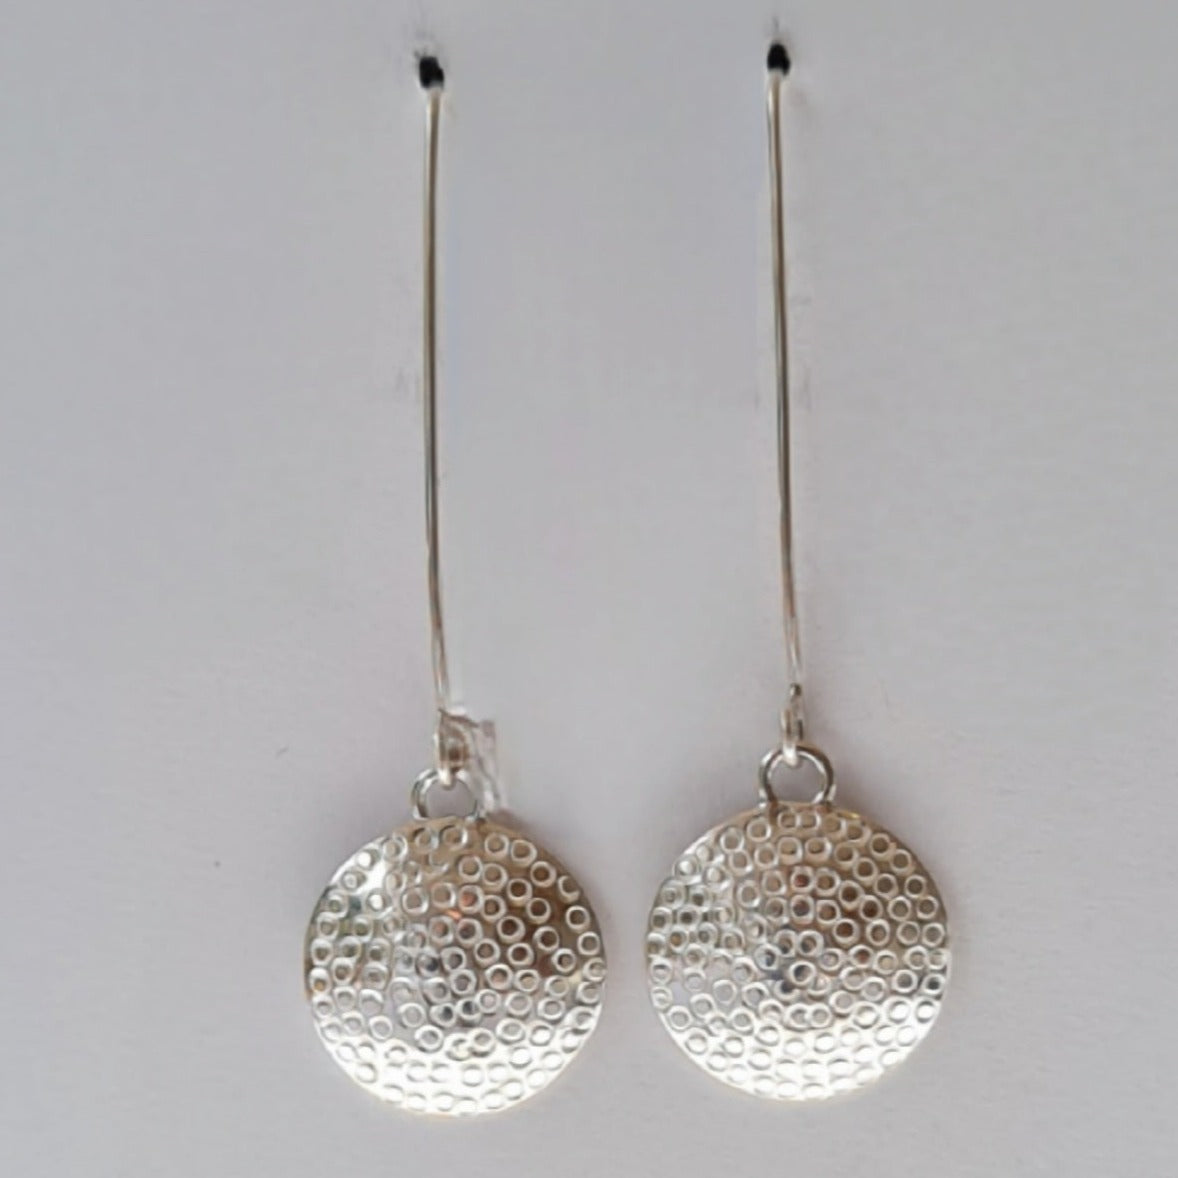 Domed earrings with circle detail